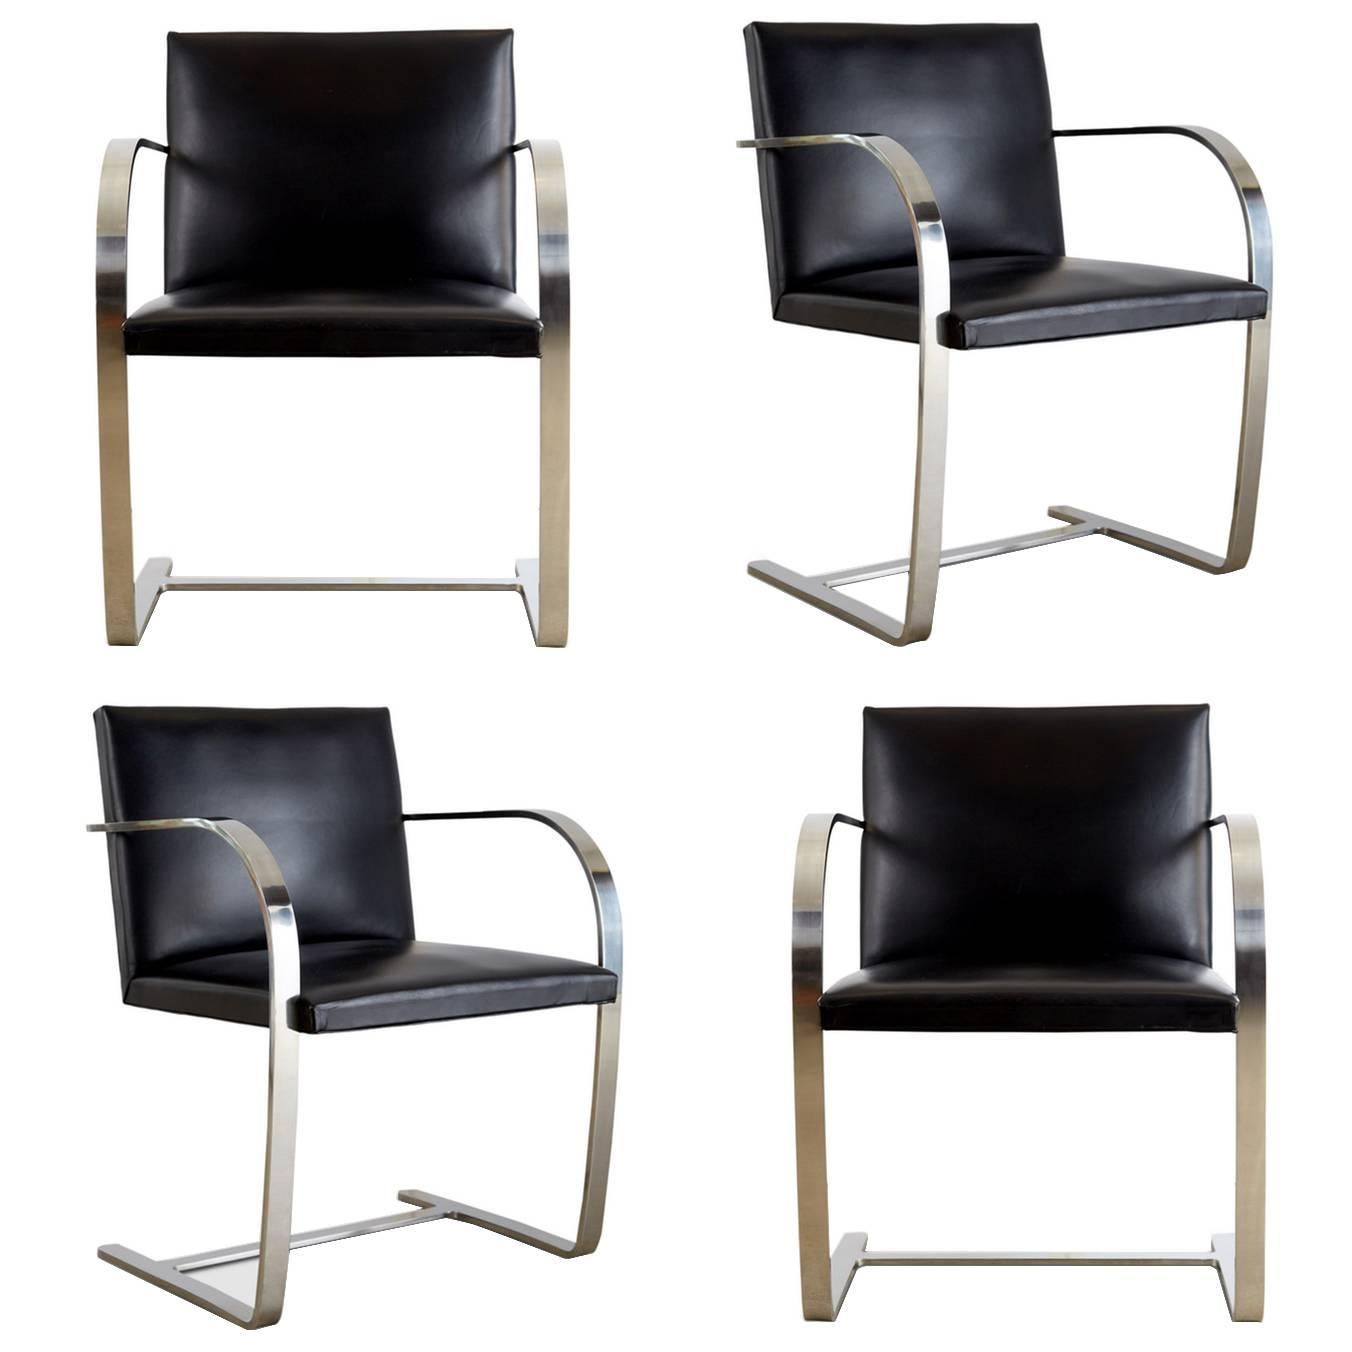 Signed Knoll Associates Brno Chairs by Mies van der Rohe, Set of Four